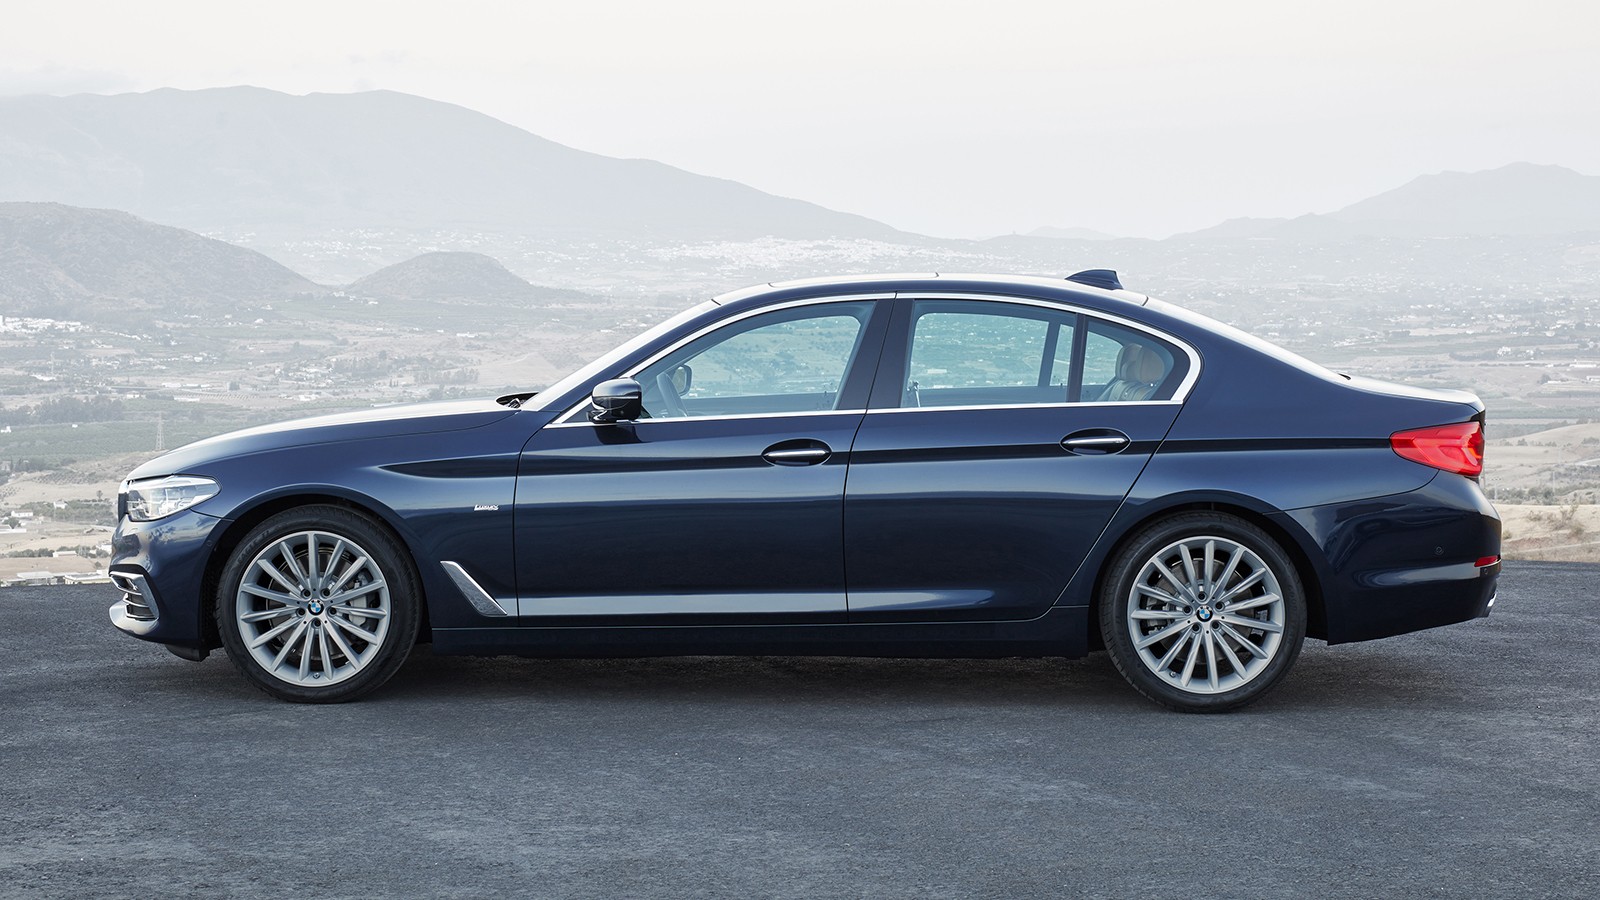 P90237307_highRes_the-new-bmw-5-series